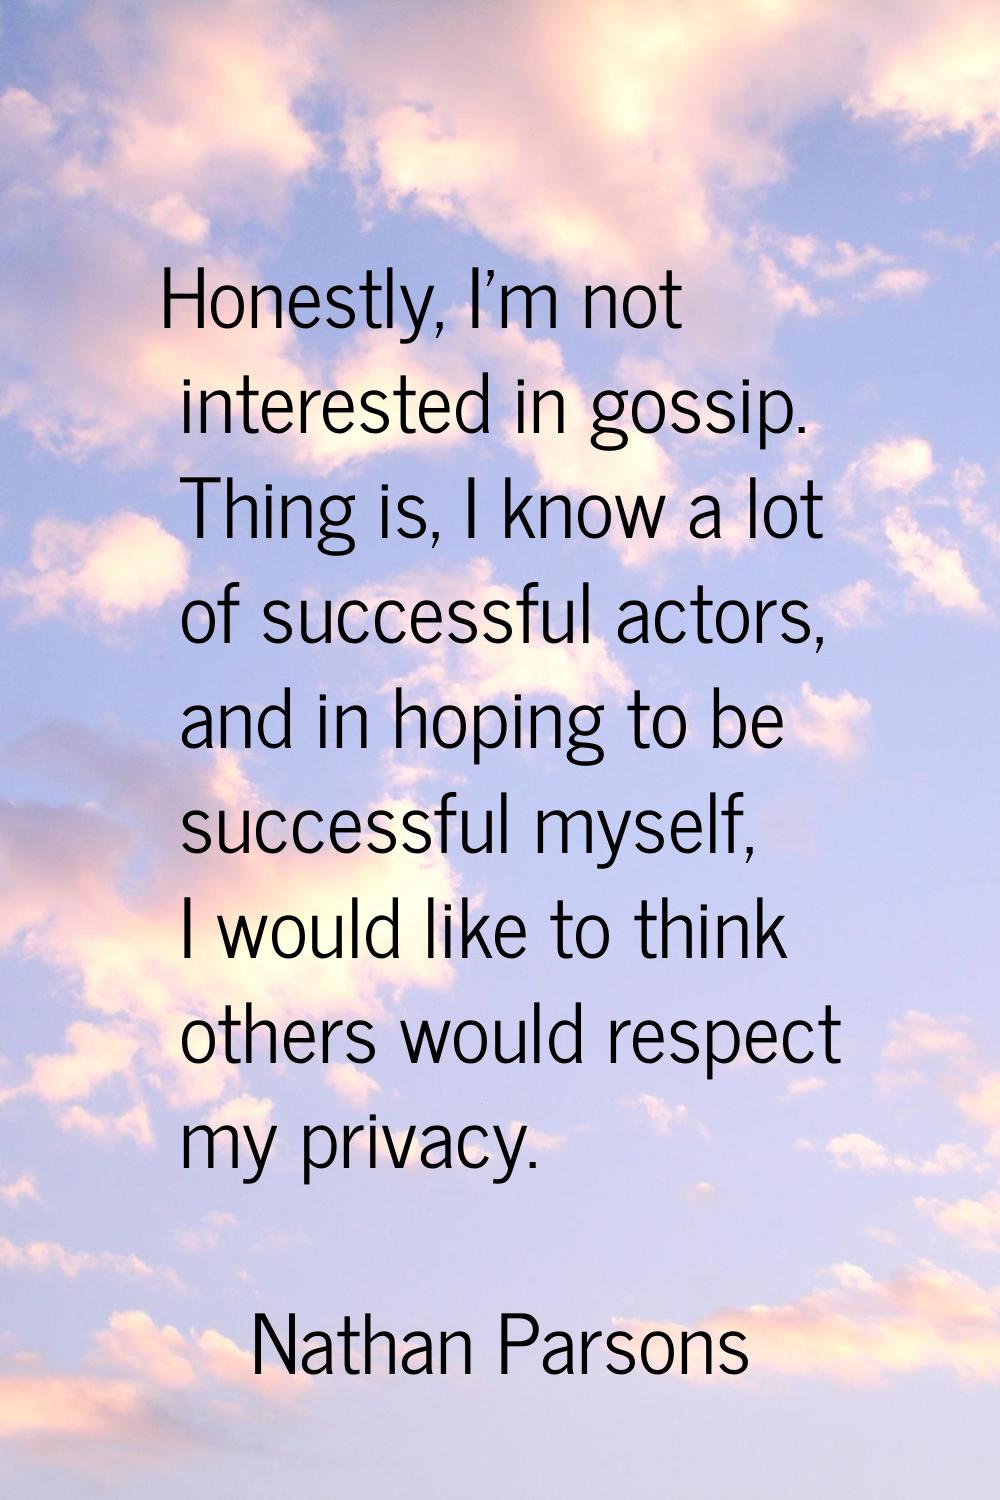 Honestly, I'm not interested in gossip. Thing is, I know a lot of successful actors, and in hoping 